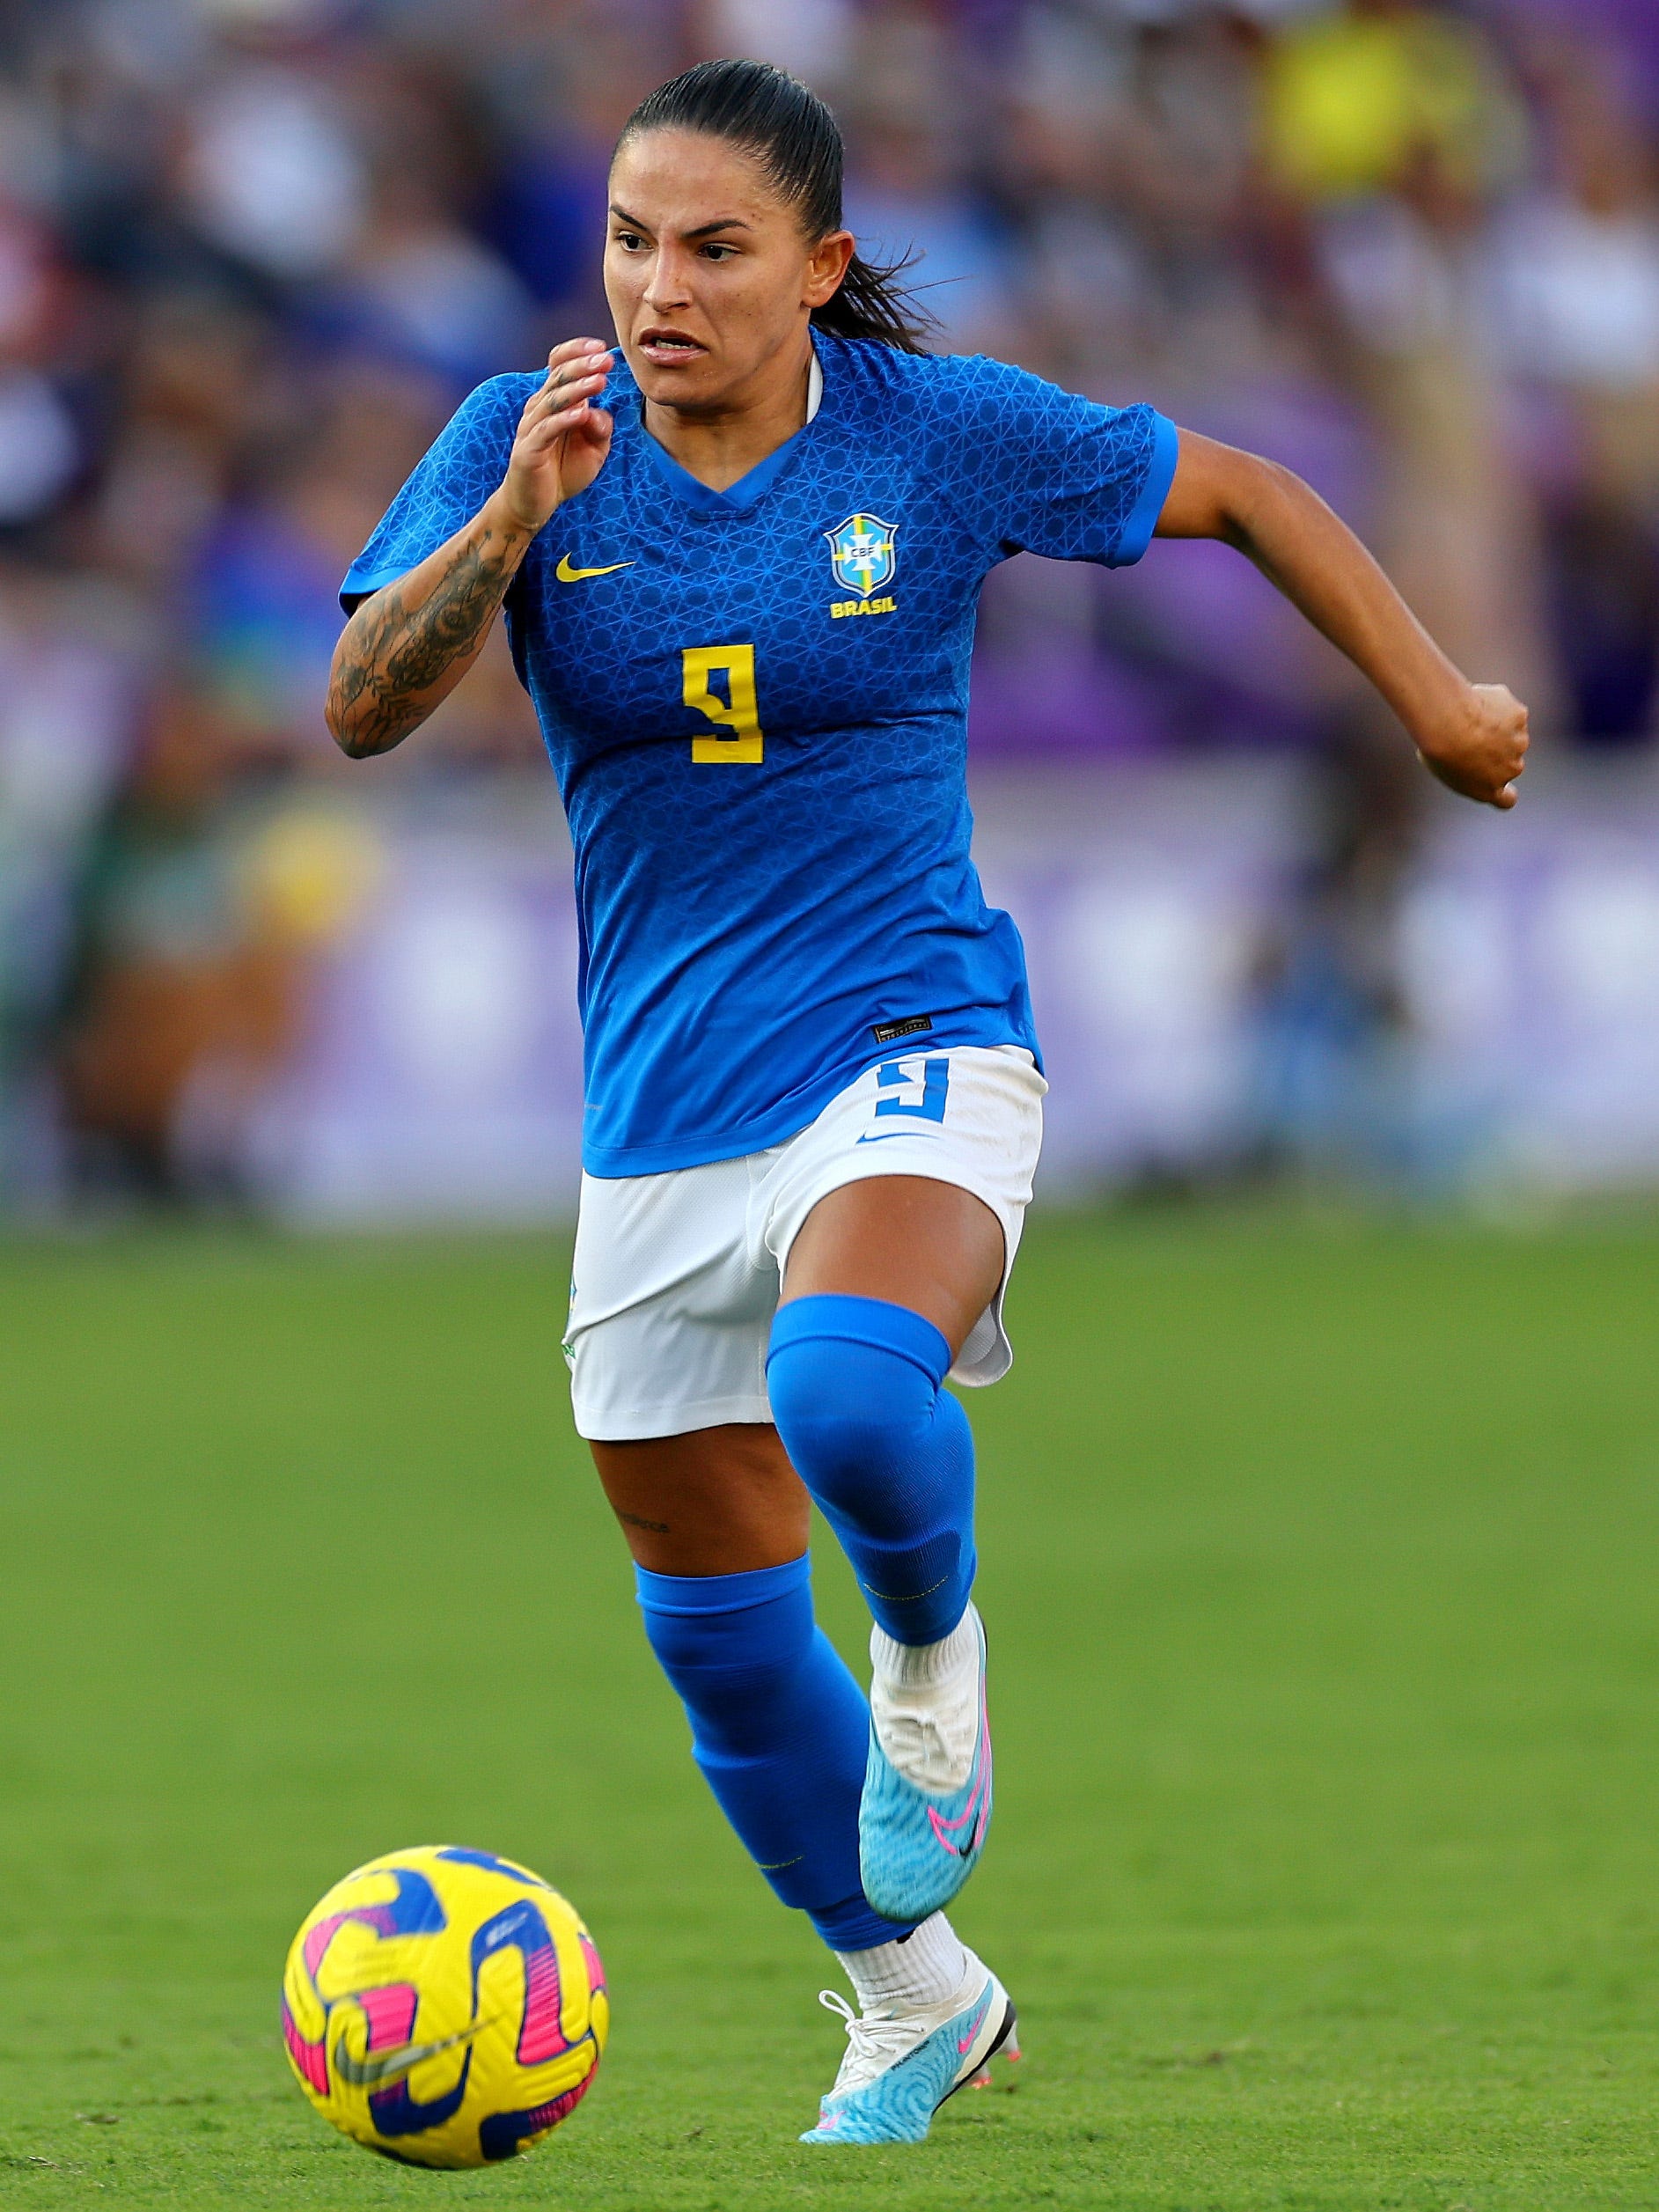 An action image of Debinha playing soccer.